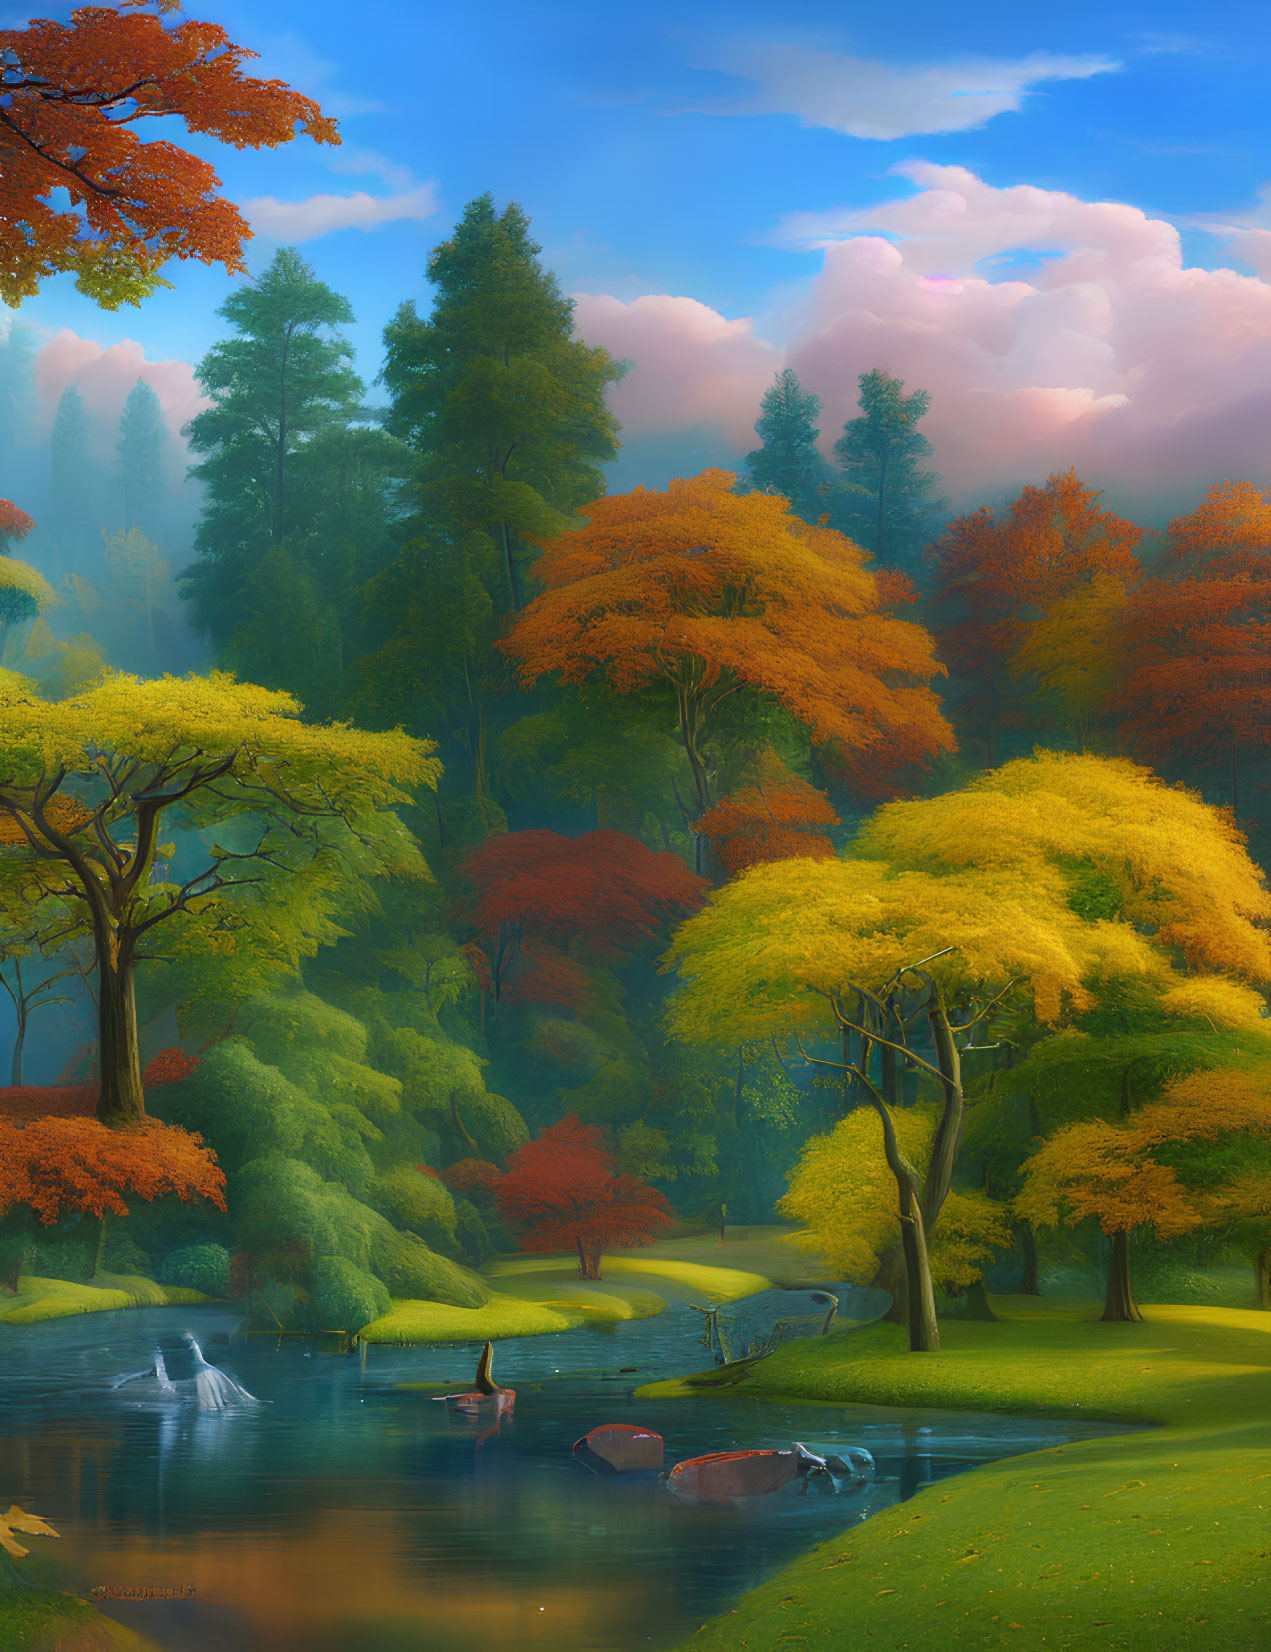 Tranquil autumn landscape with colorful trees, calm river, ducks, and blue sky